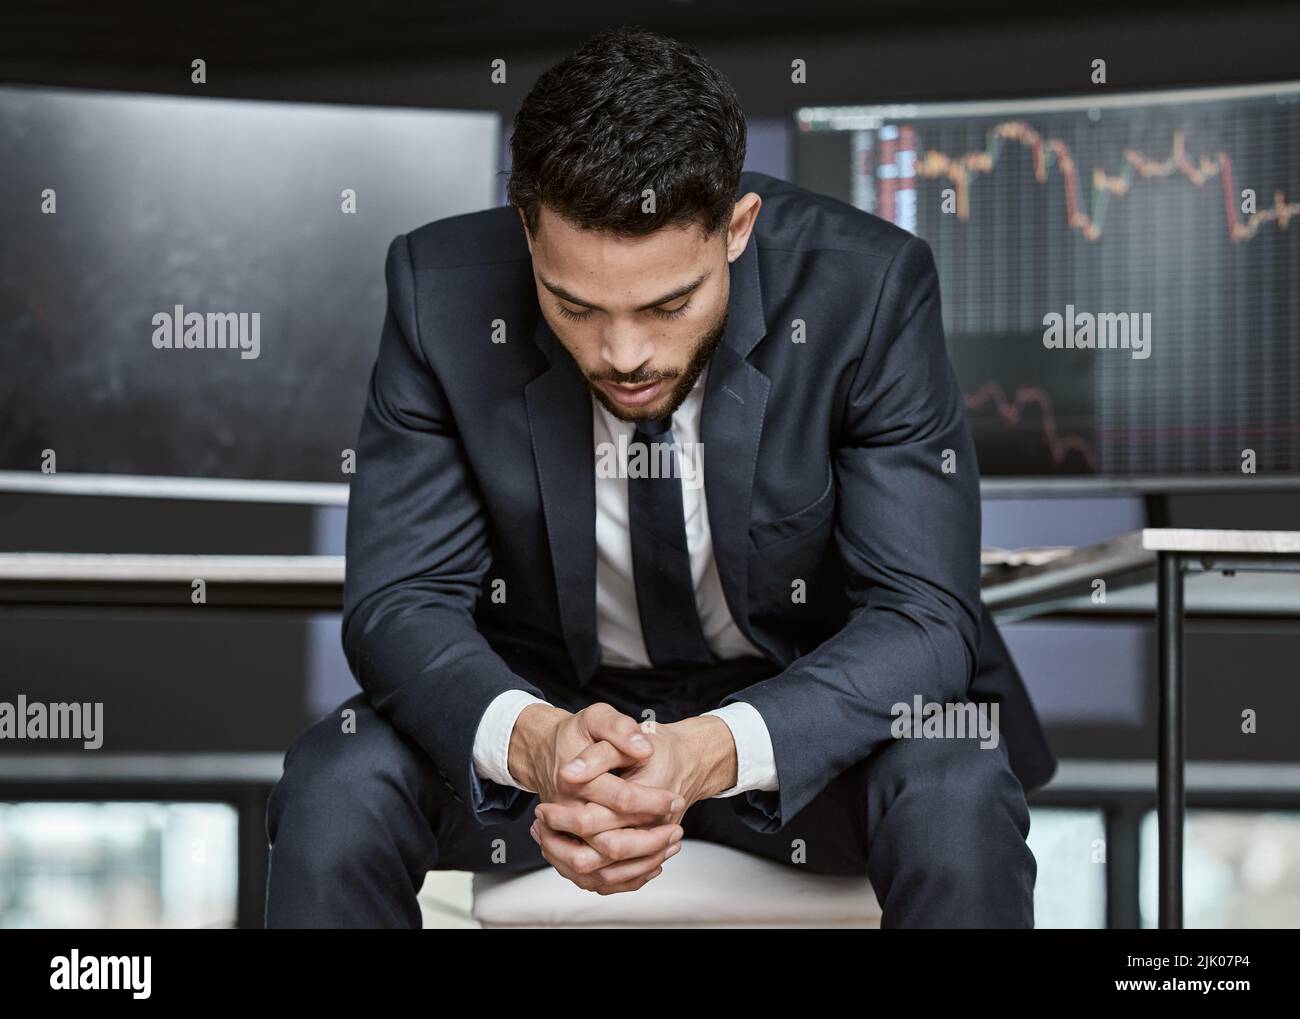 Businessman with depression on the stock market, trading during a financial crisis. Stressed trader in a bear market, looking at stocks crashing Stock Photo